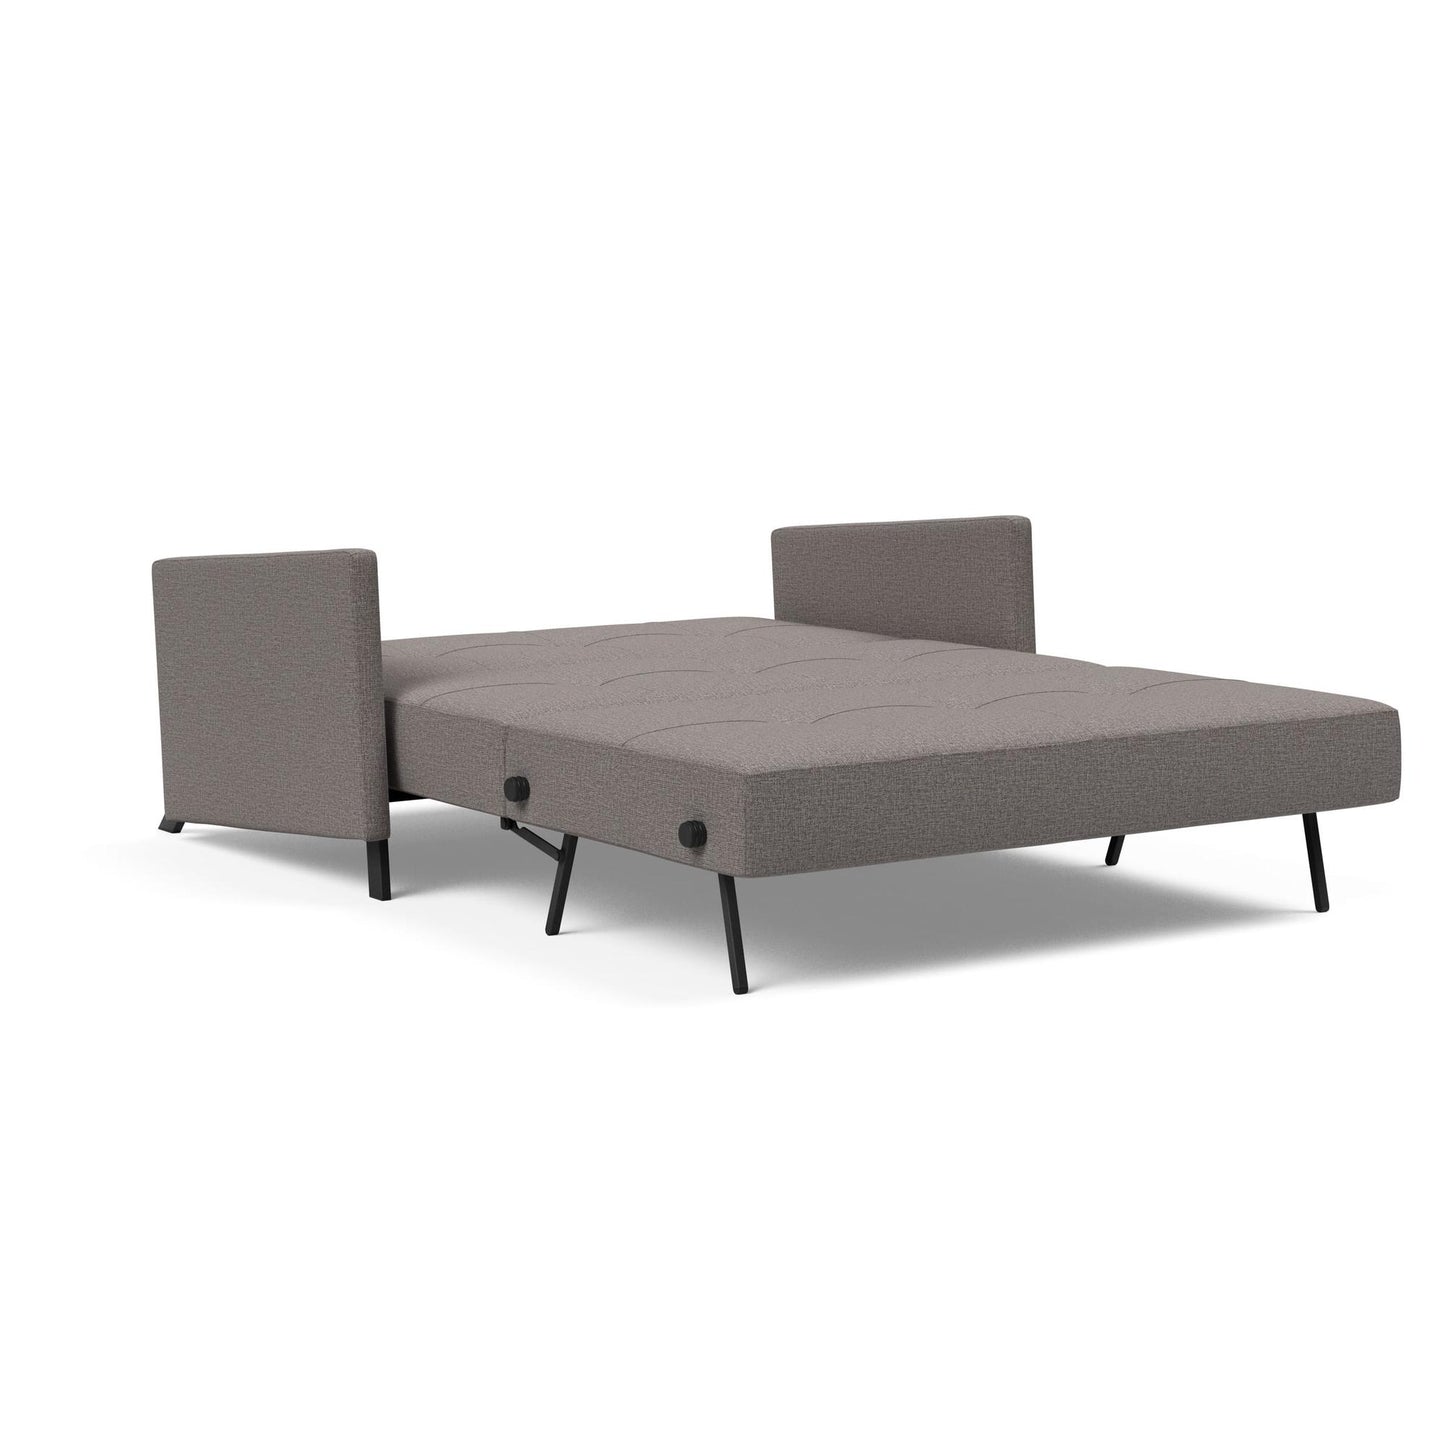 Cubed Deluxe Full Sofa Bed w/Arms in Mixed Dance Gray